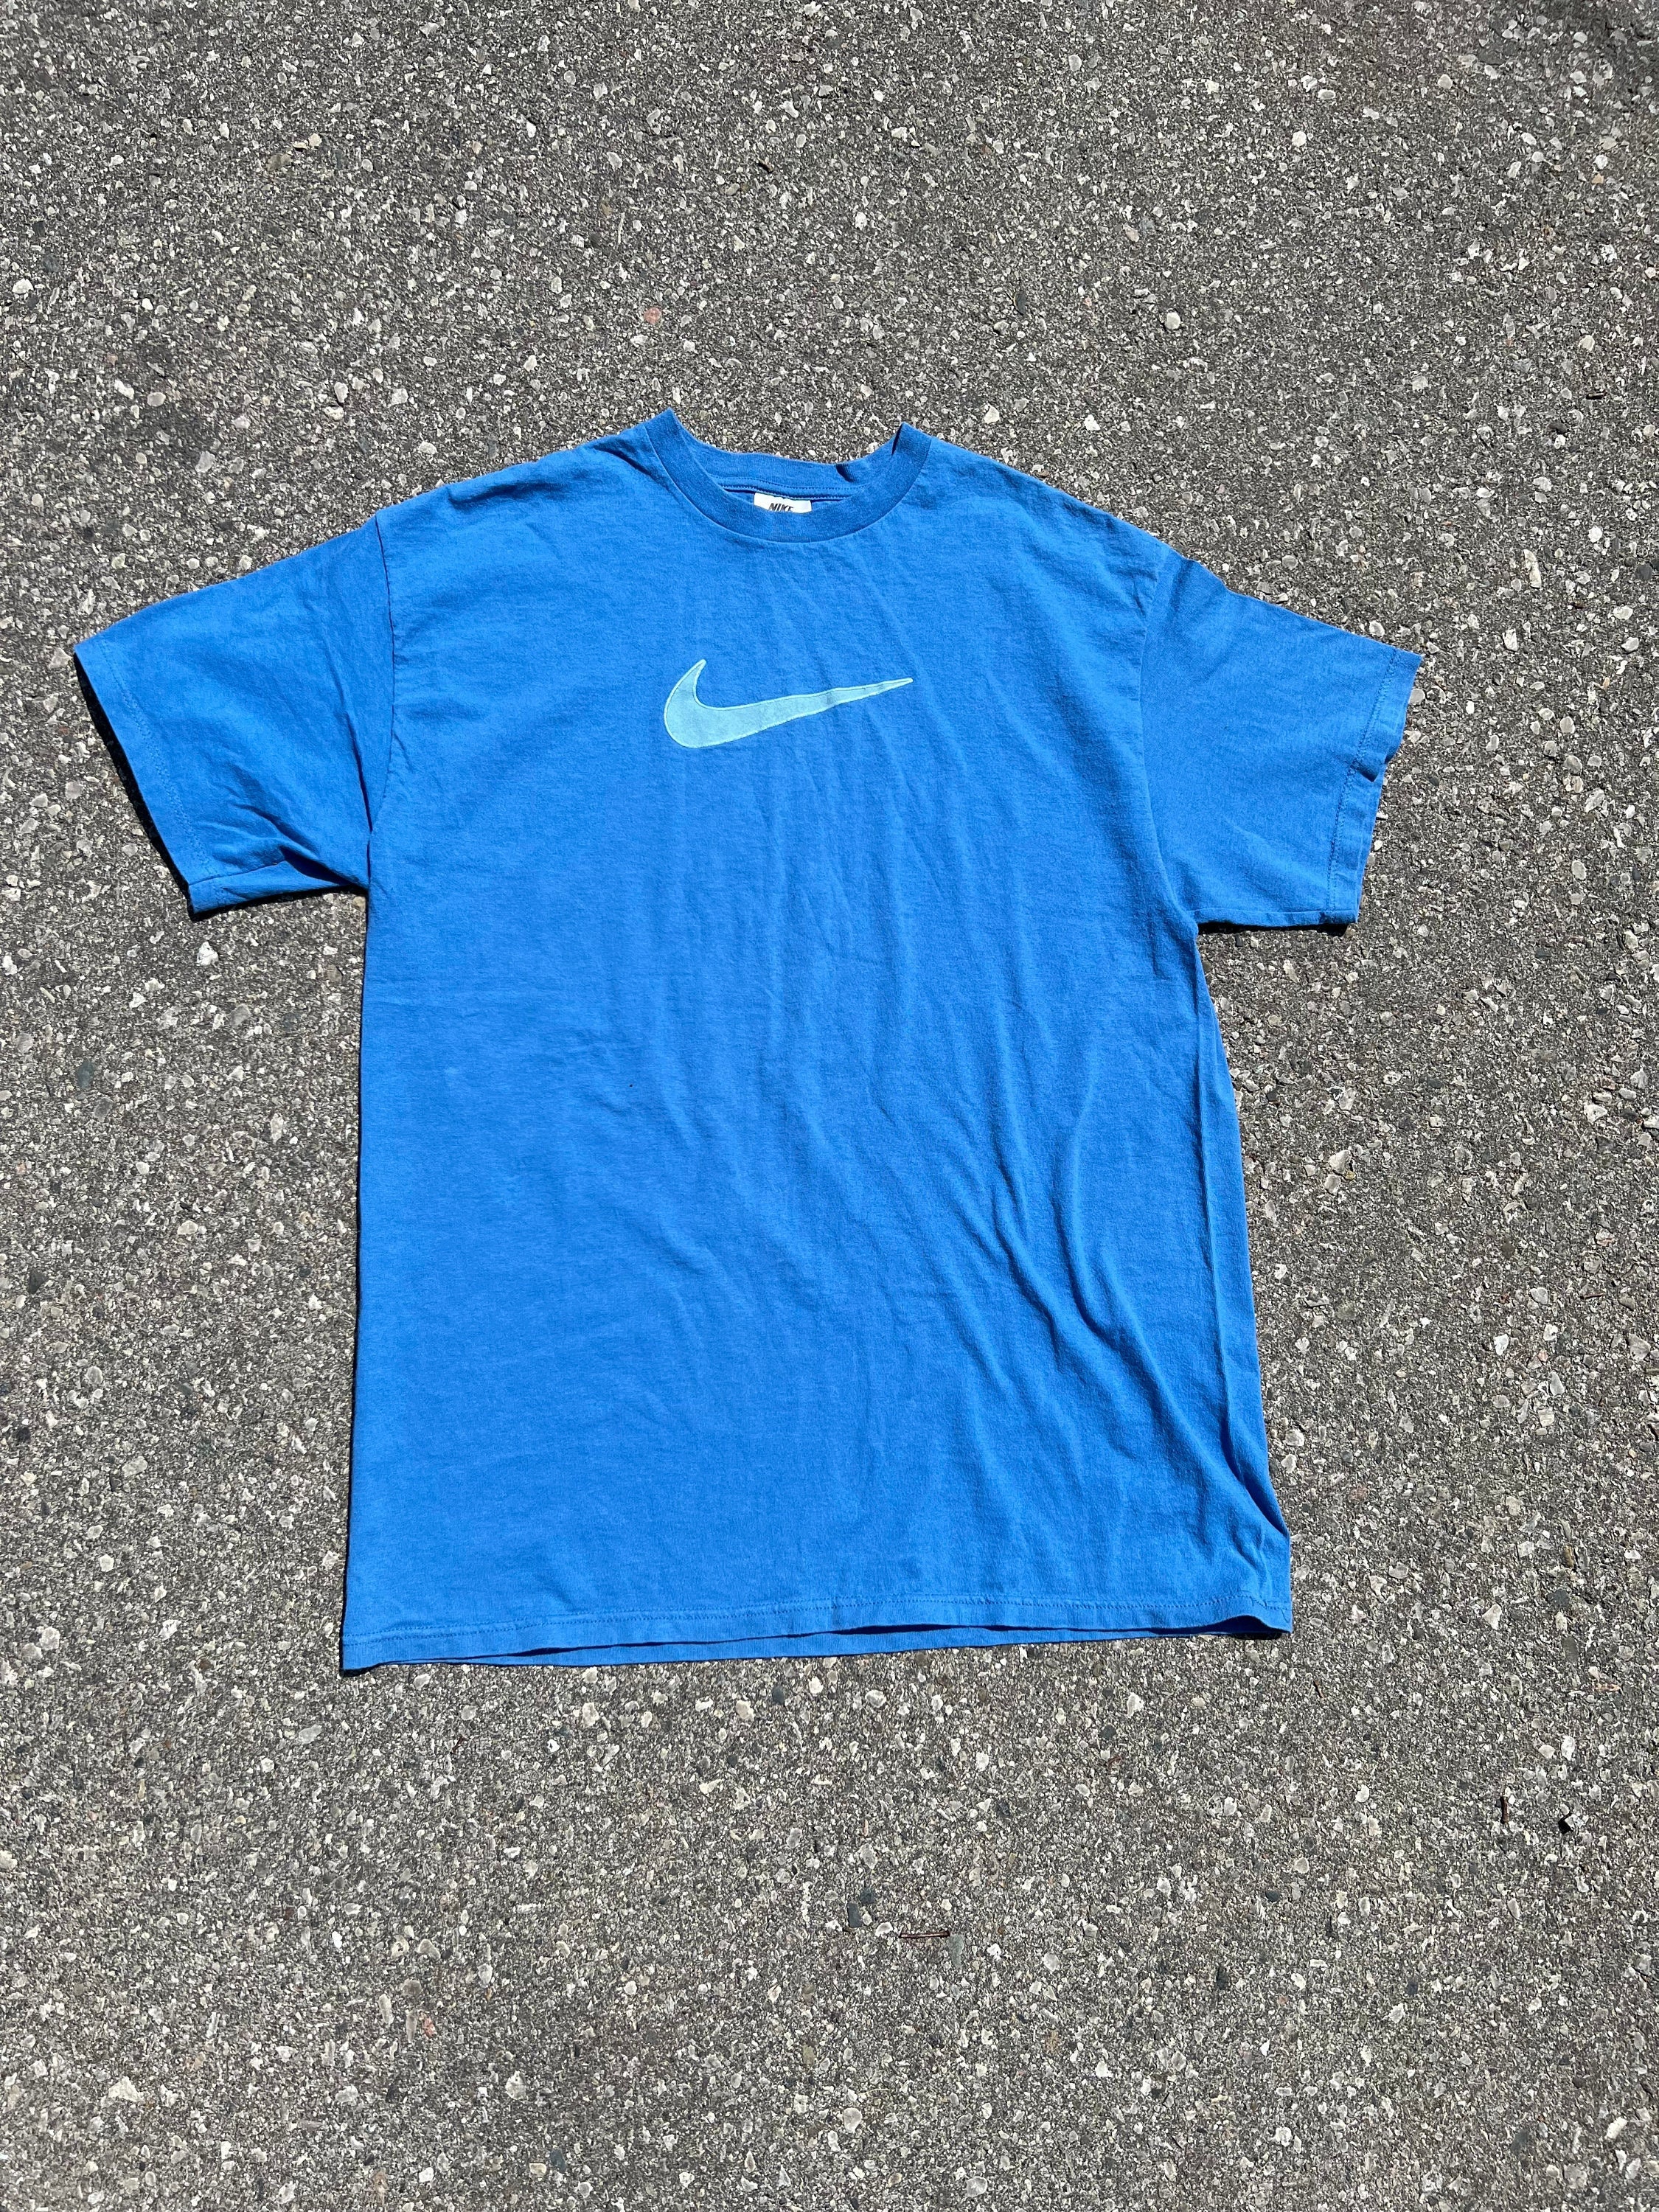 VINTAGE NIKE BIG SWOOSH DEFINITION TEE SHIRT LATE 1980S LARGE MADE IN USA